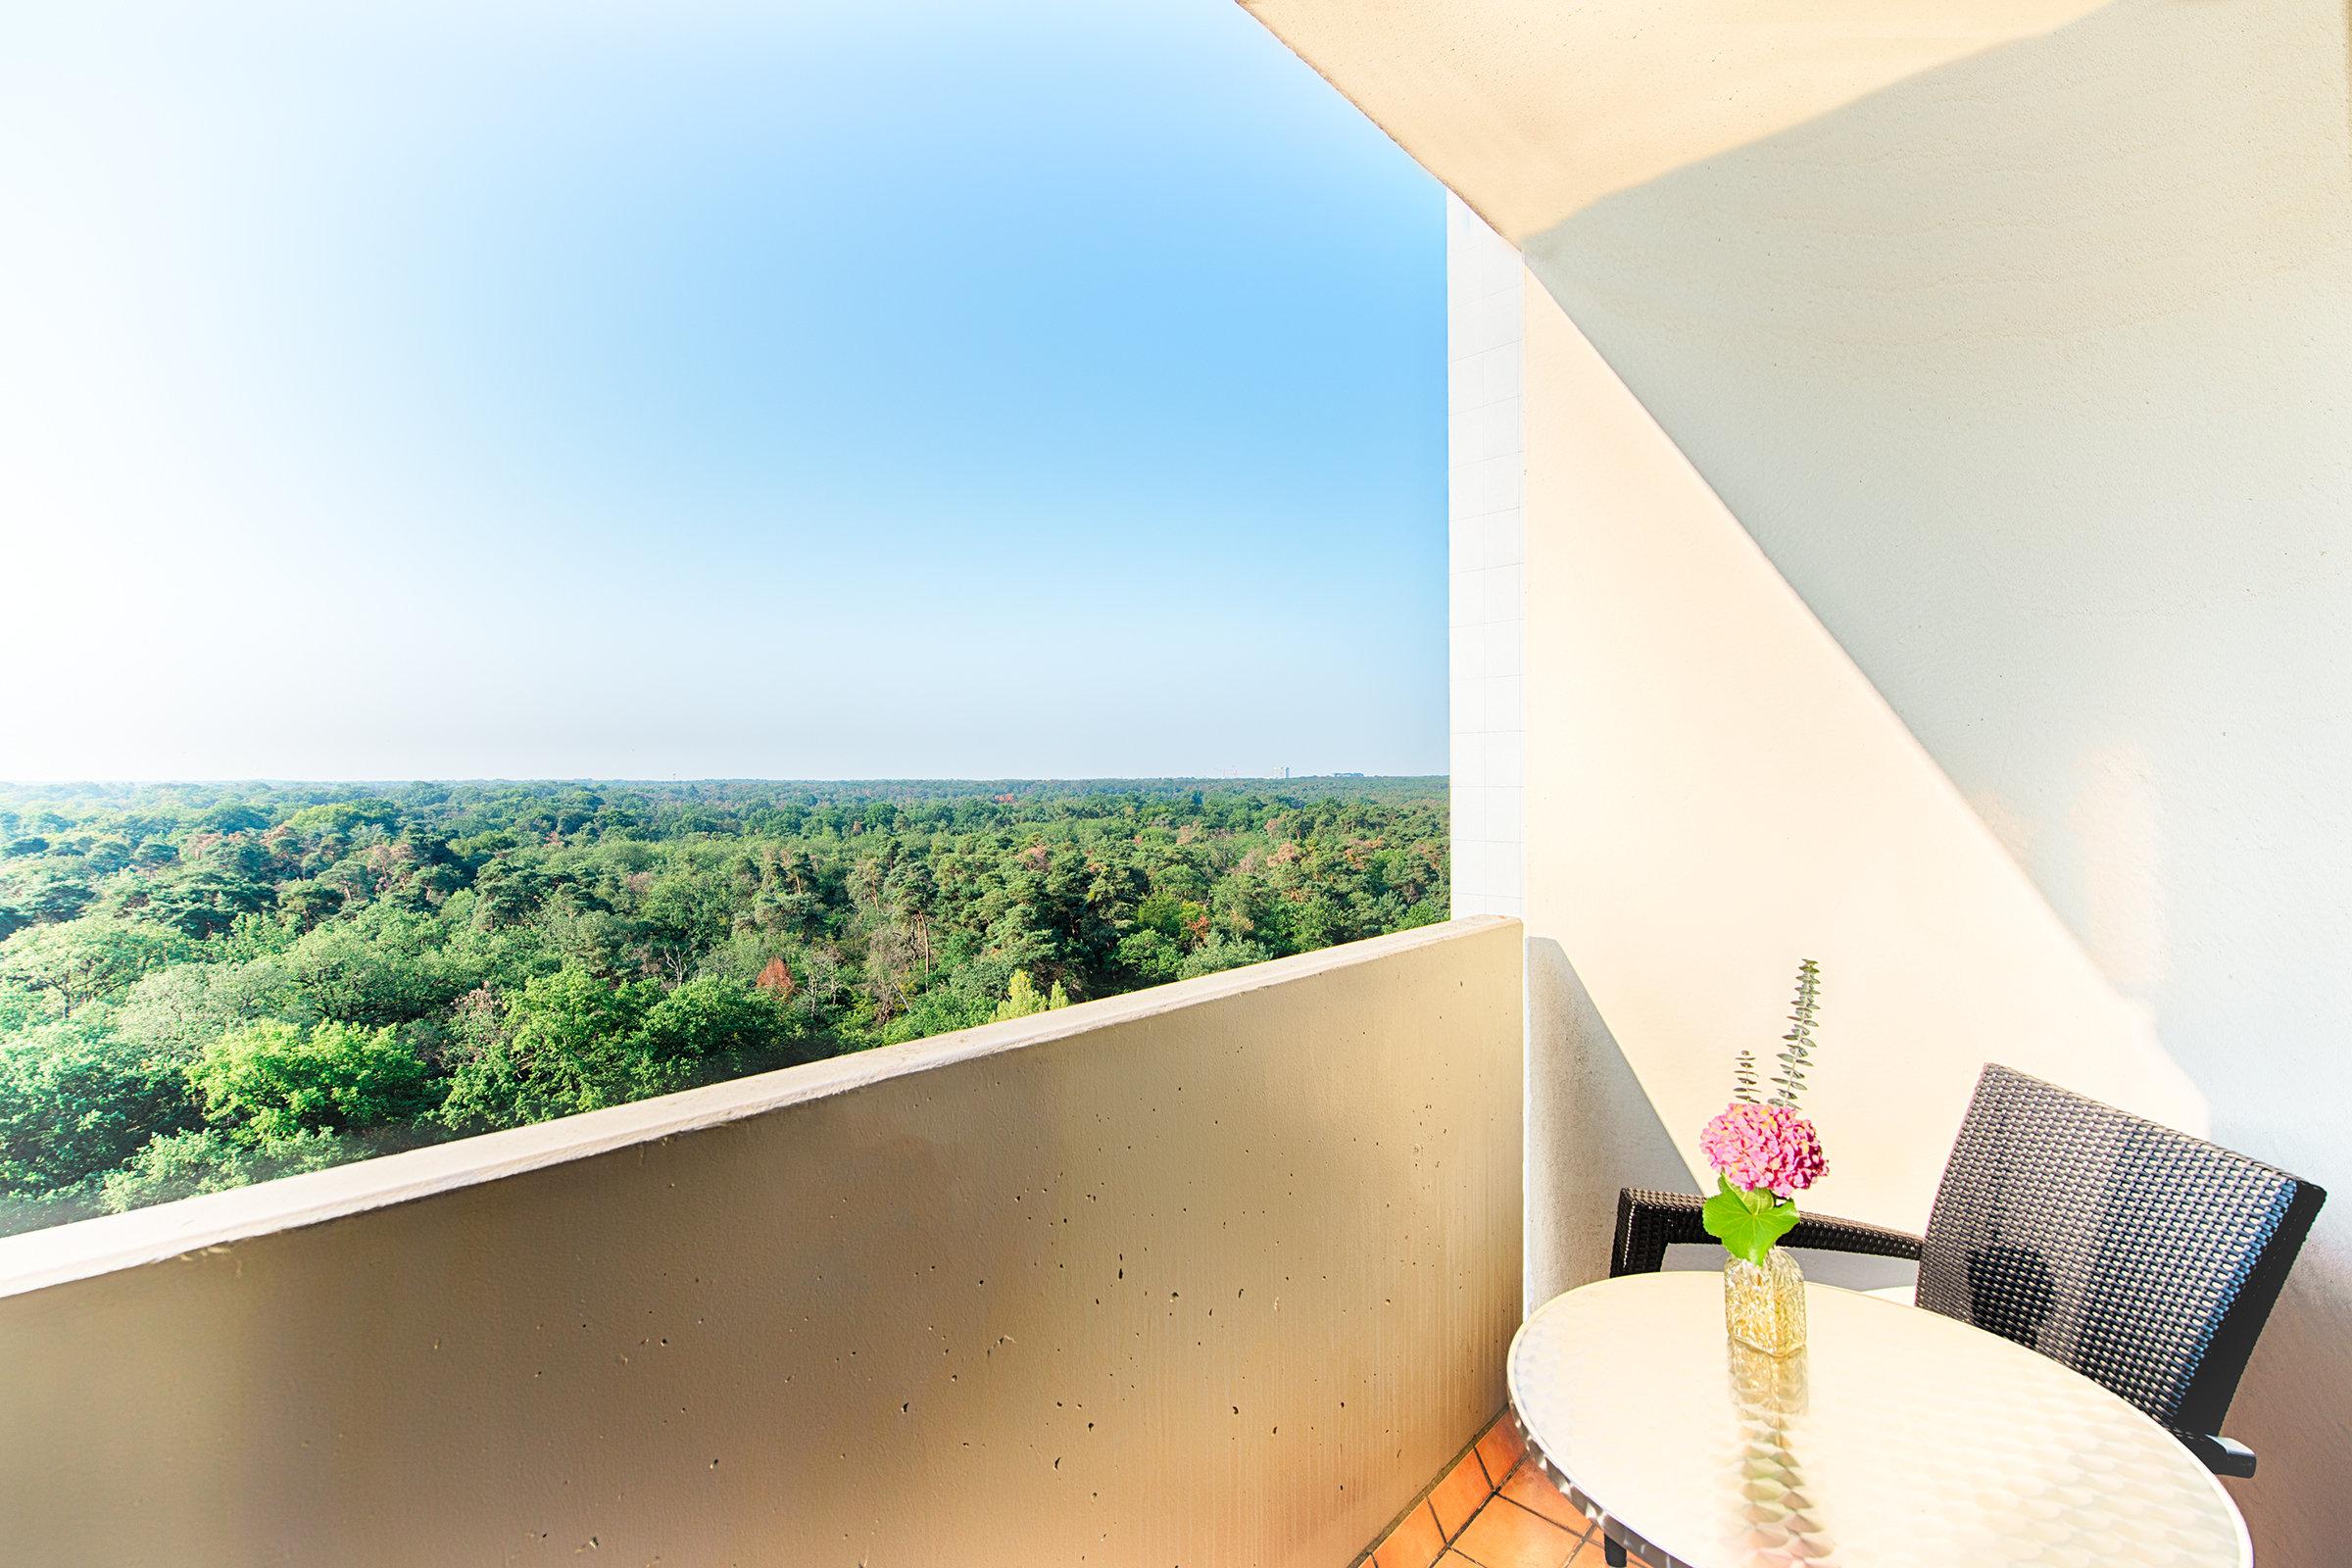 Our balcony rooms offer you views over the forest or the skyline